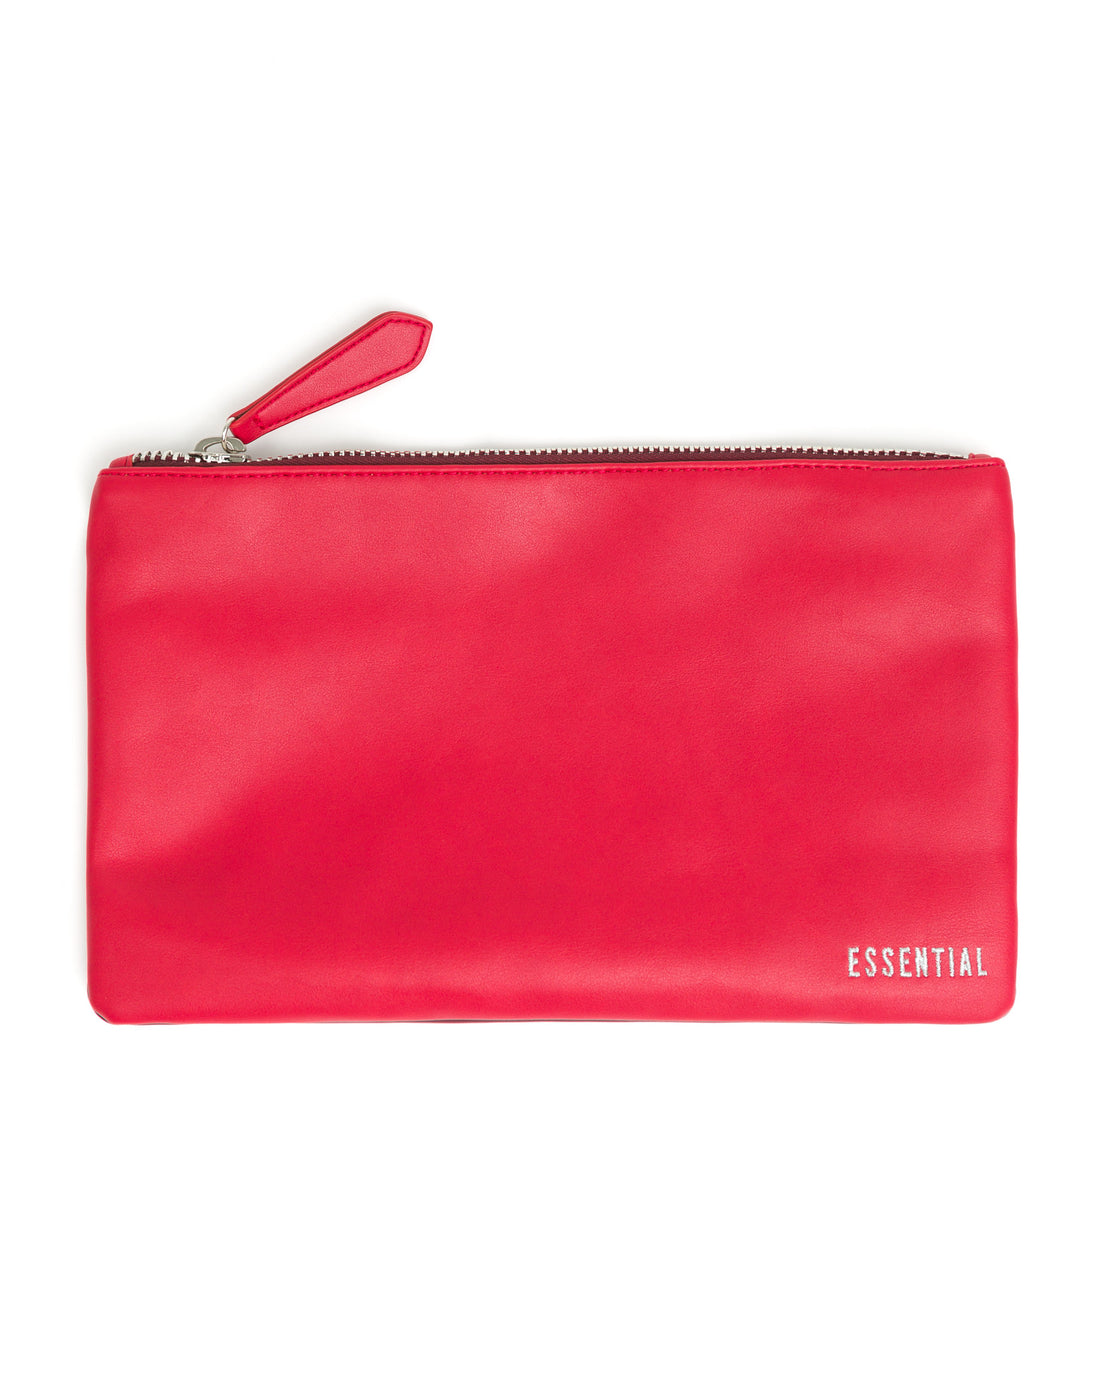 ACCESSORIES - Essential Pouch